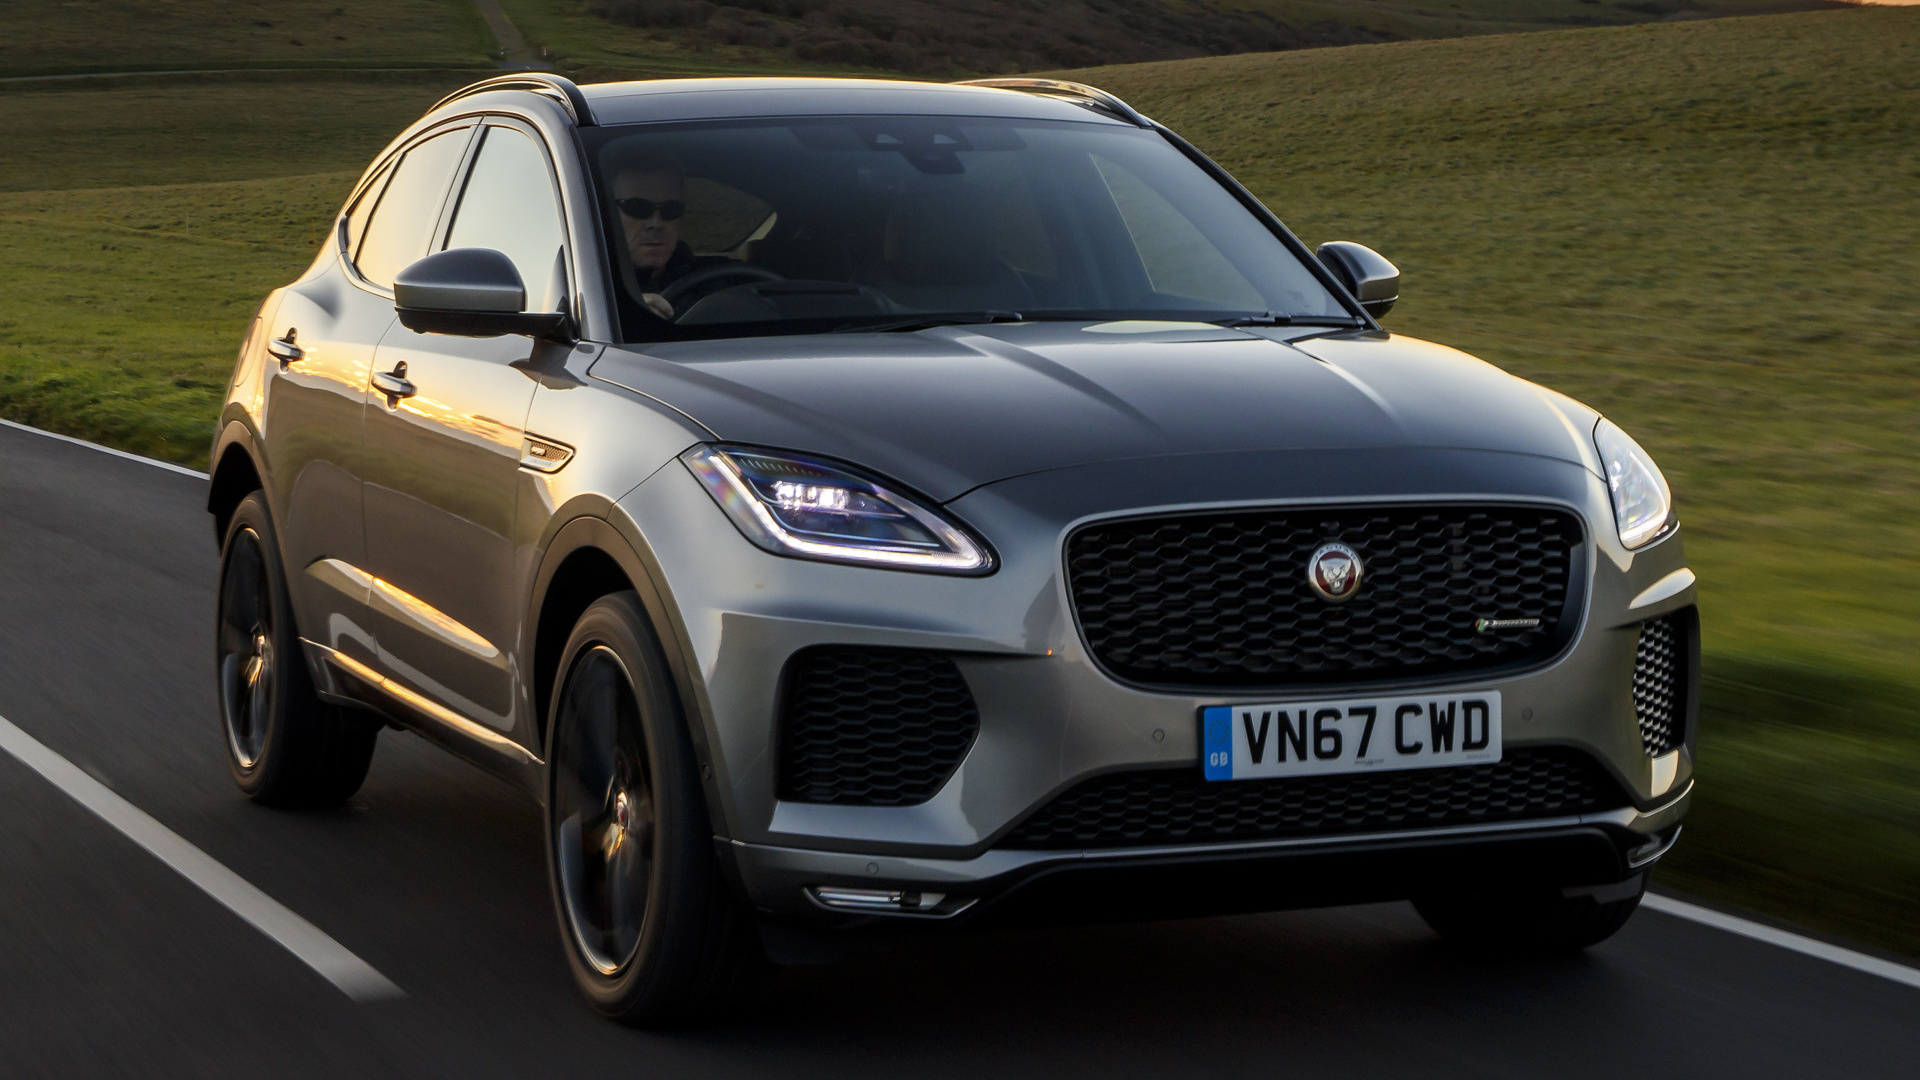 Jaguar E-Pace R-Dynamic (2017) UK Wallpapers and HD Images ...